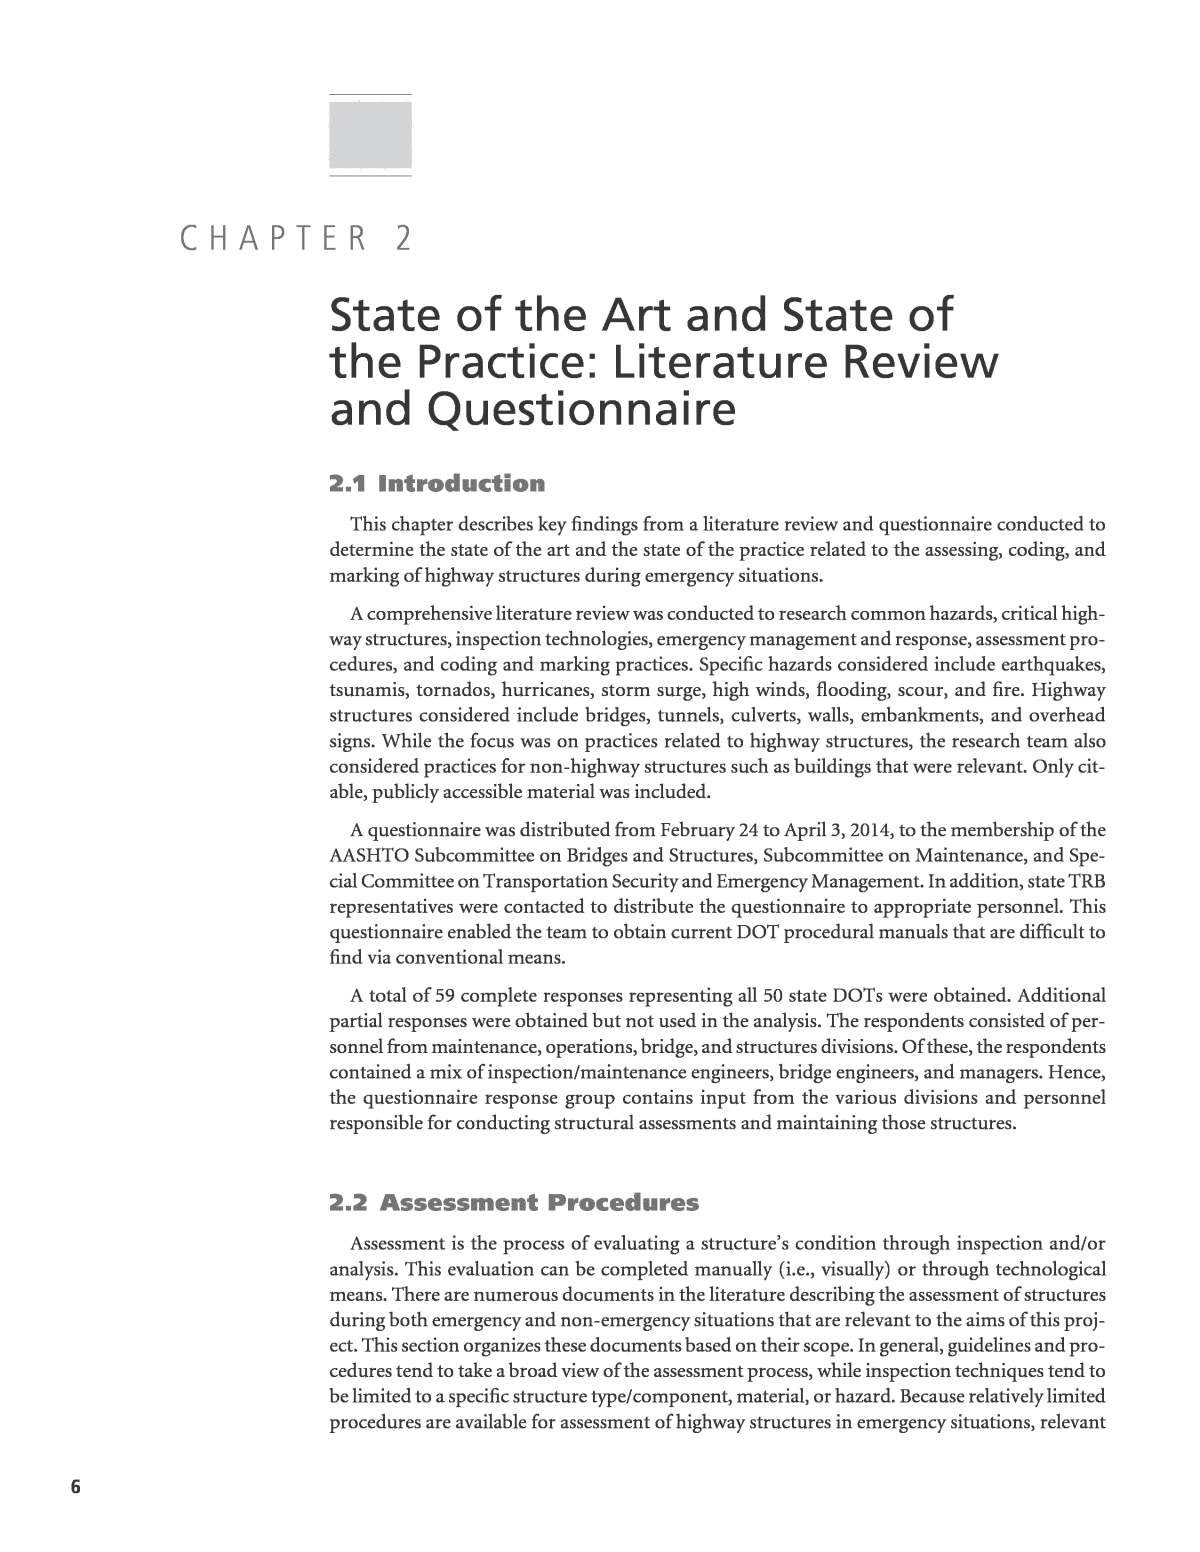 Chapter 2 - State of the Art and State of the Practice: Literature